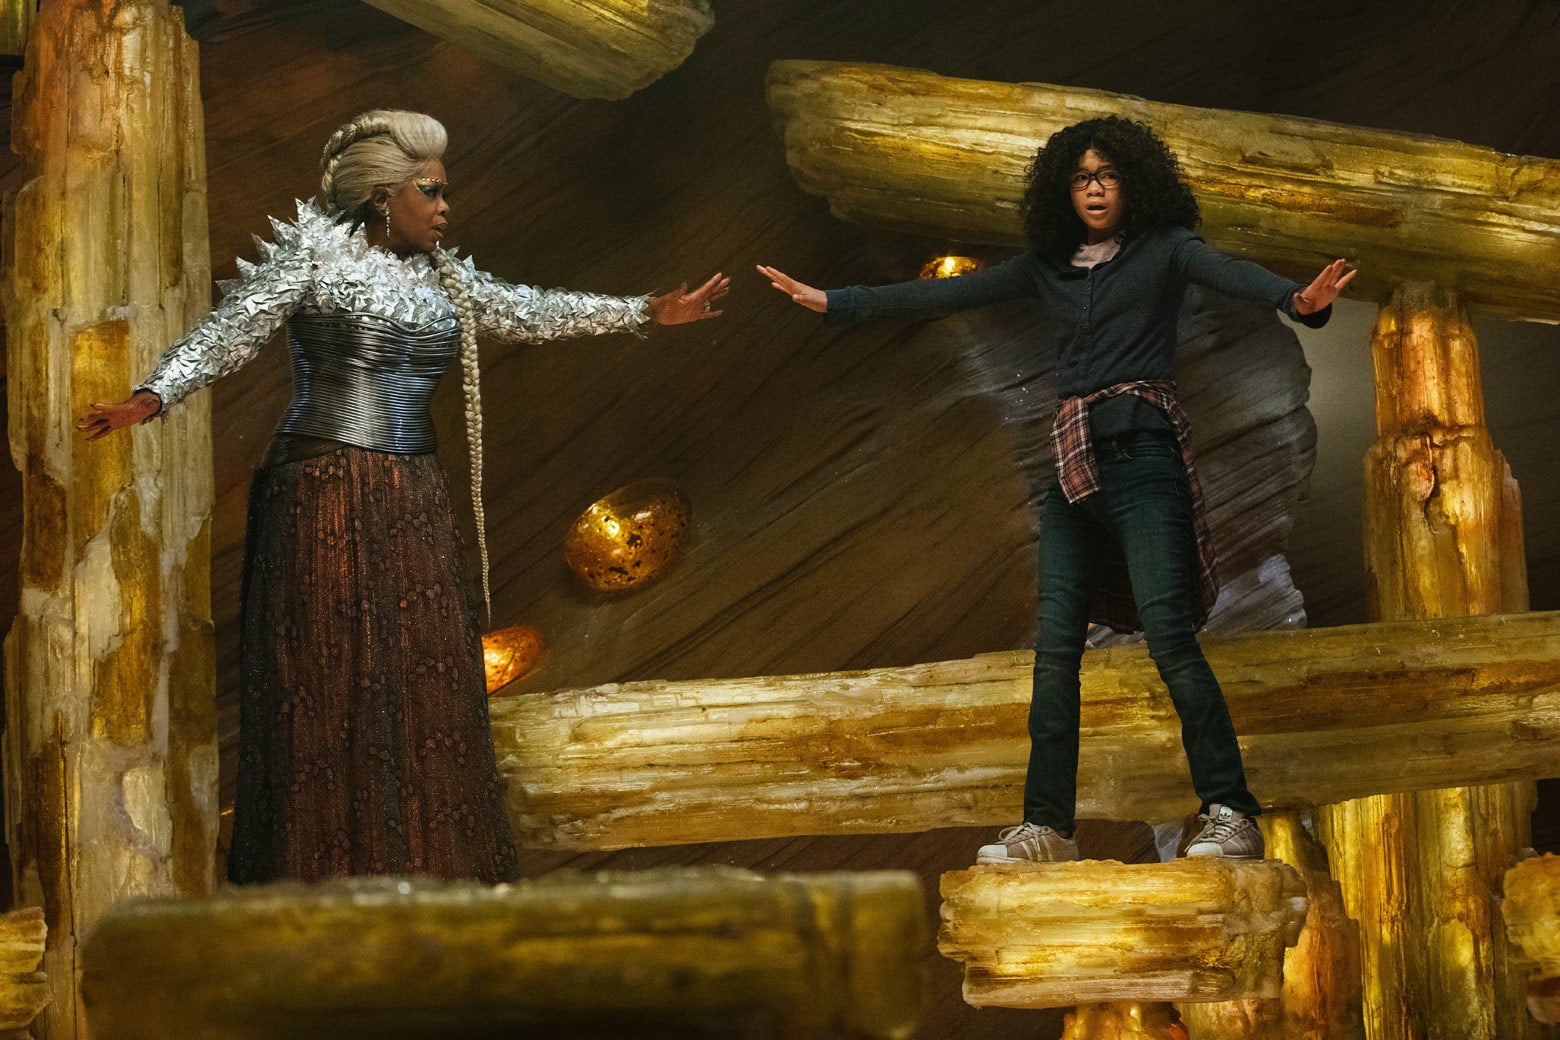 Oprah Winfrey as Mrs. Which and Storm Reid as Meg Murry in Disney’s A Wrinkle in Time.